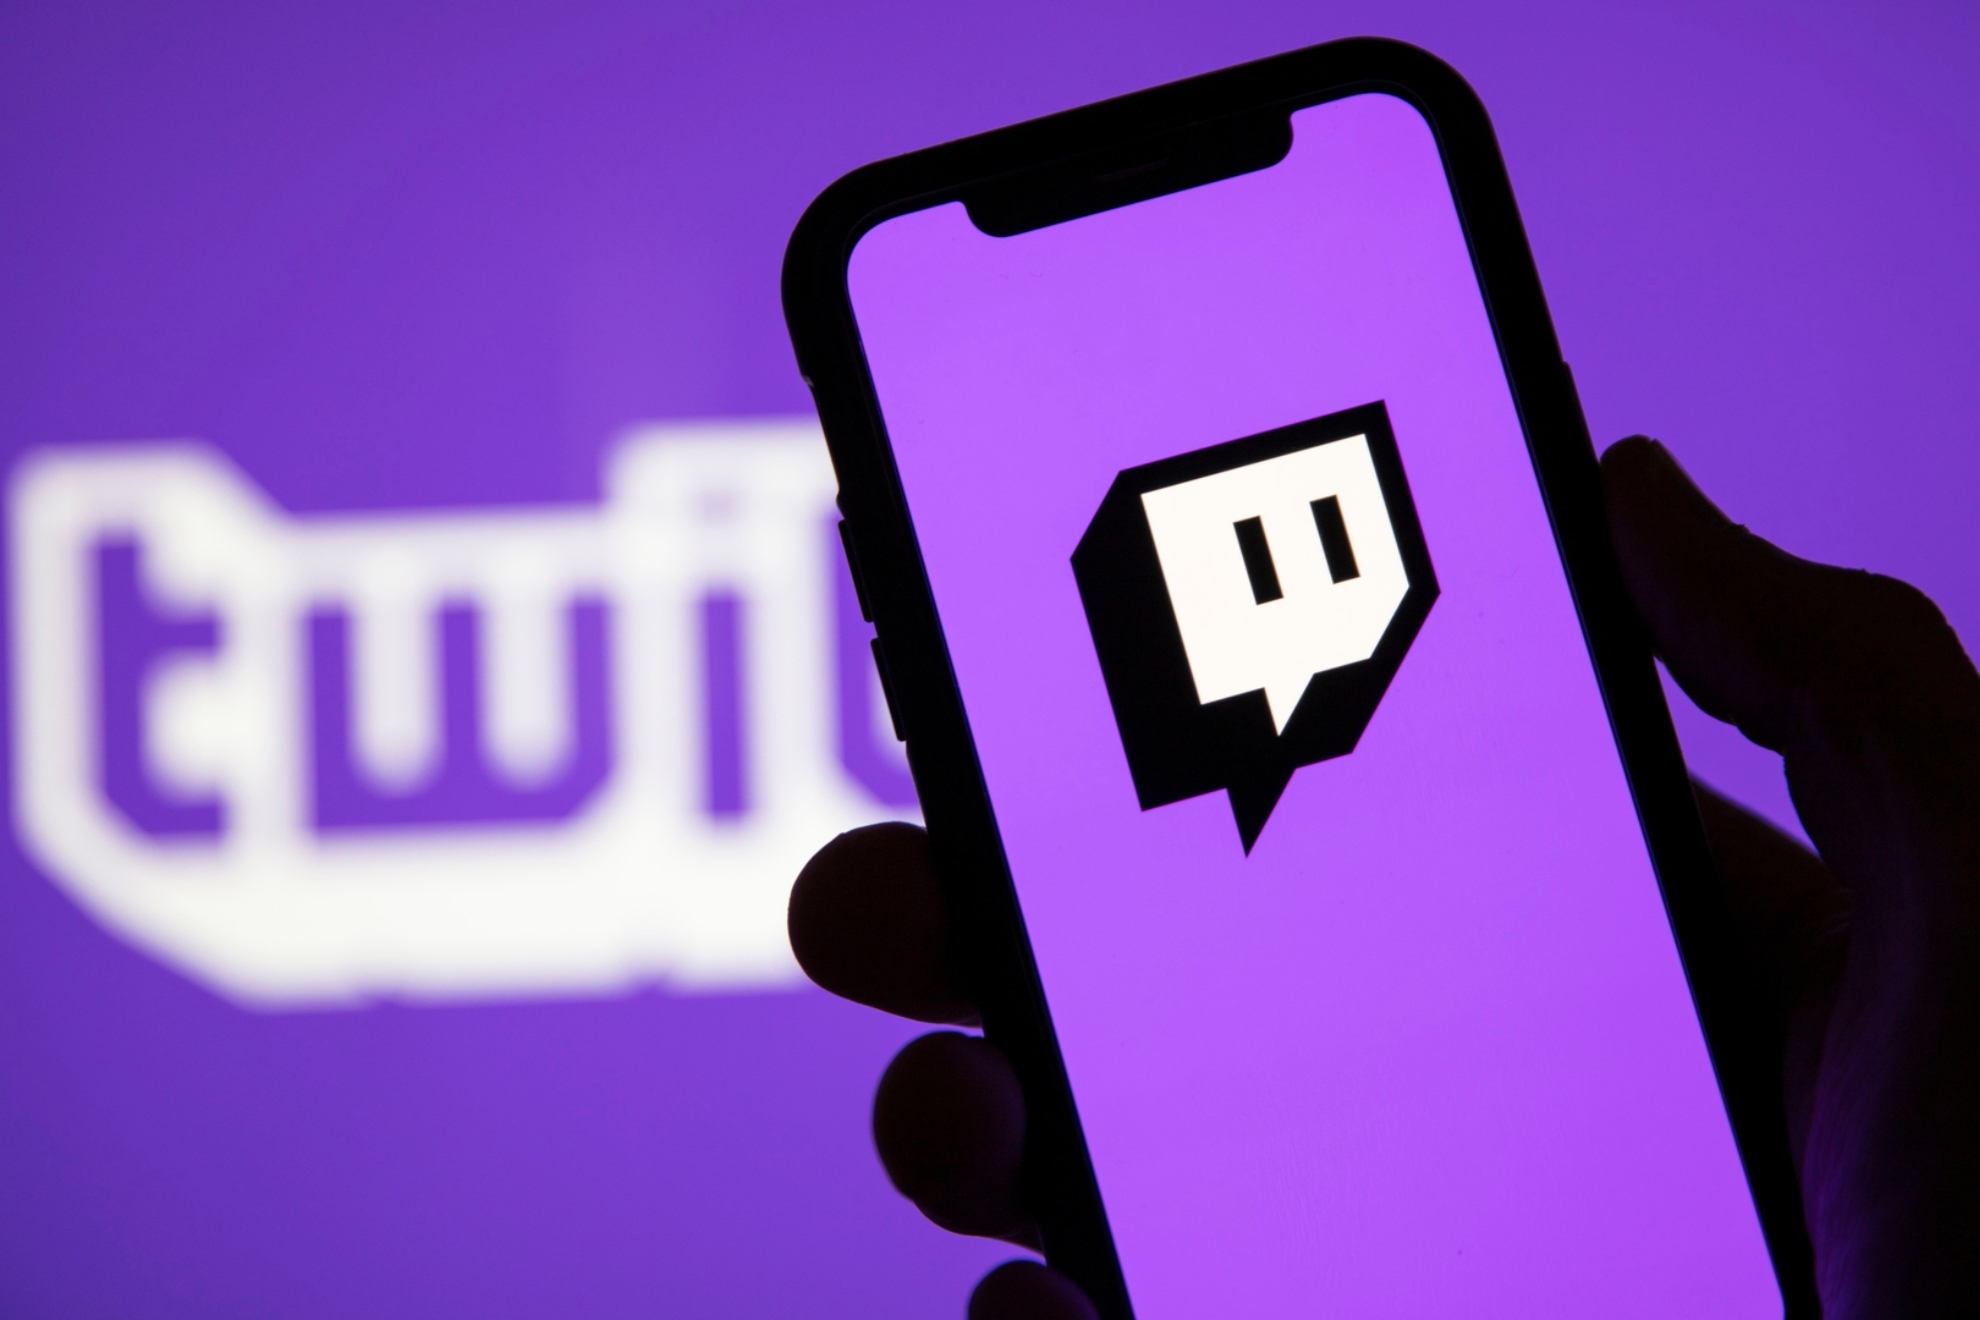 Gambling sites not licensed in the US will be banned from Twitch